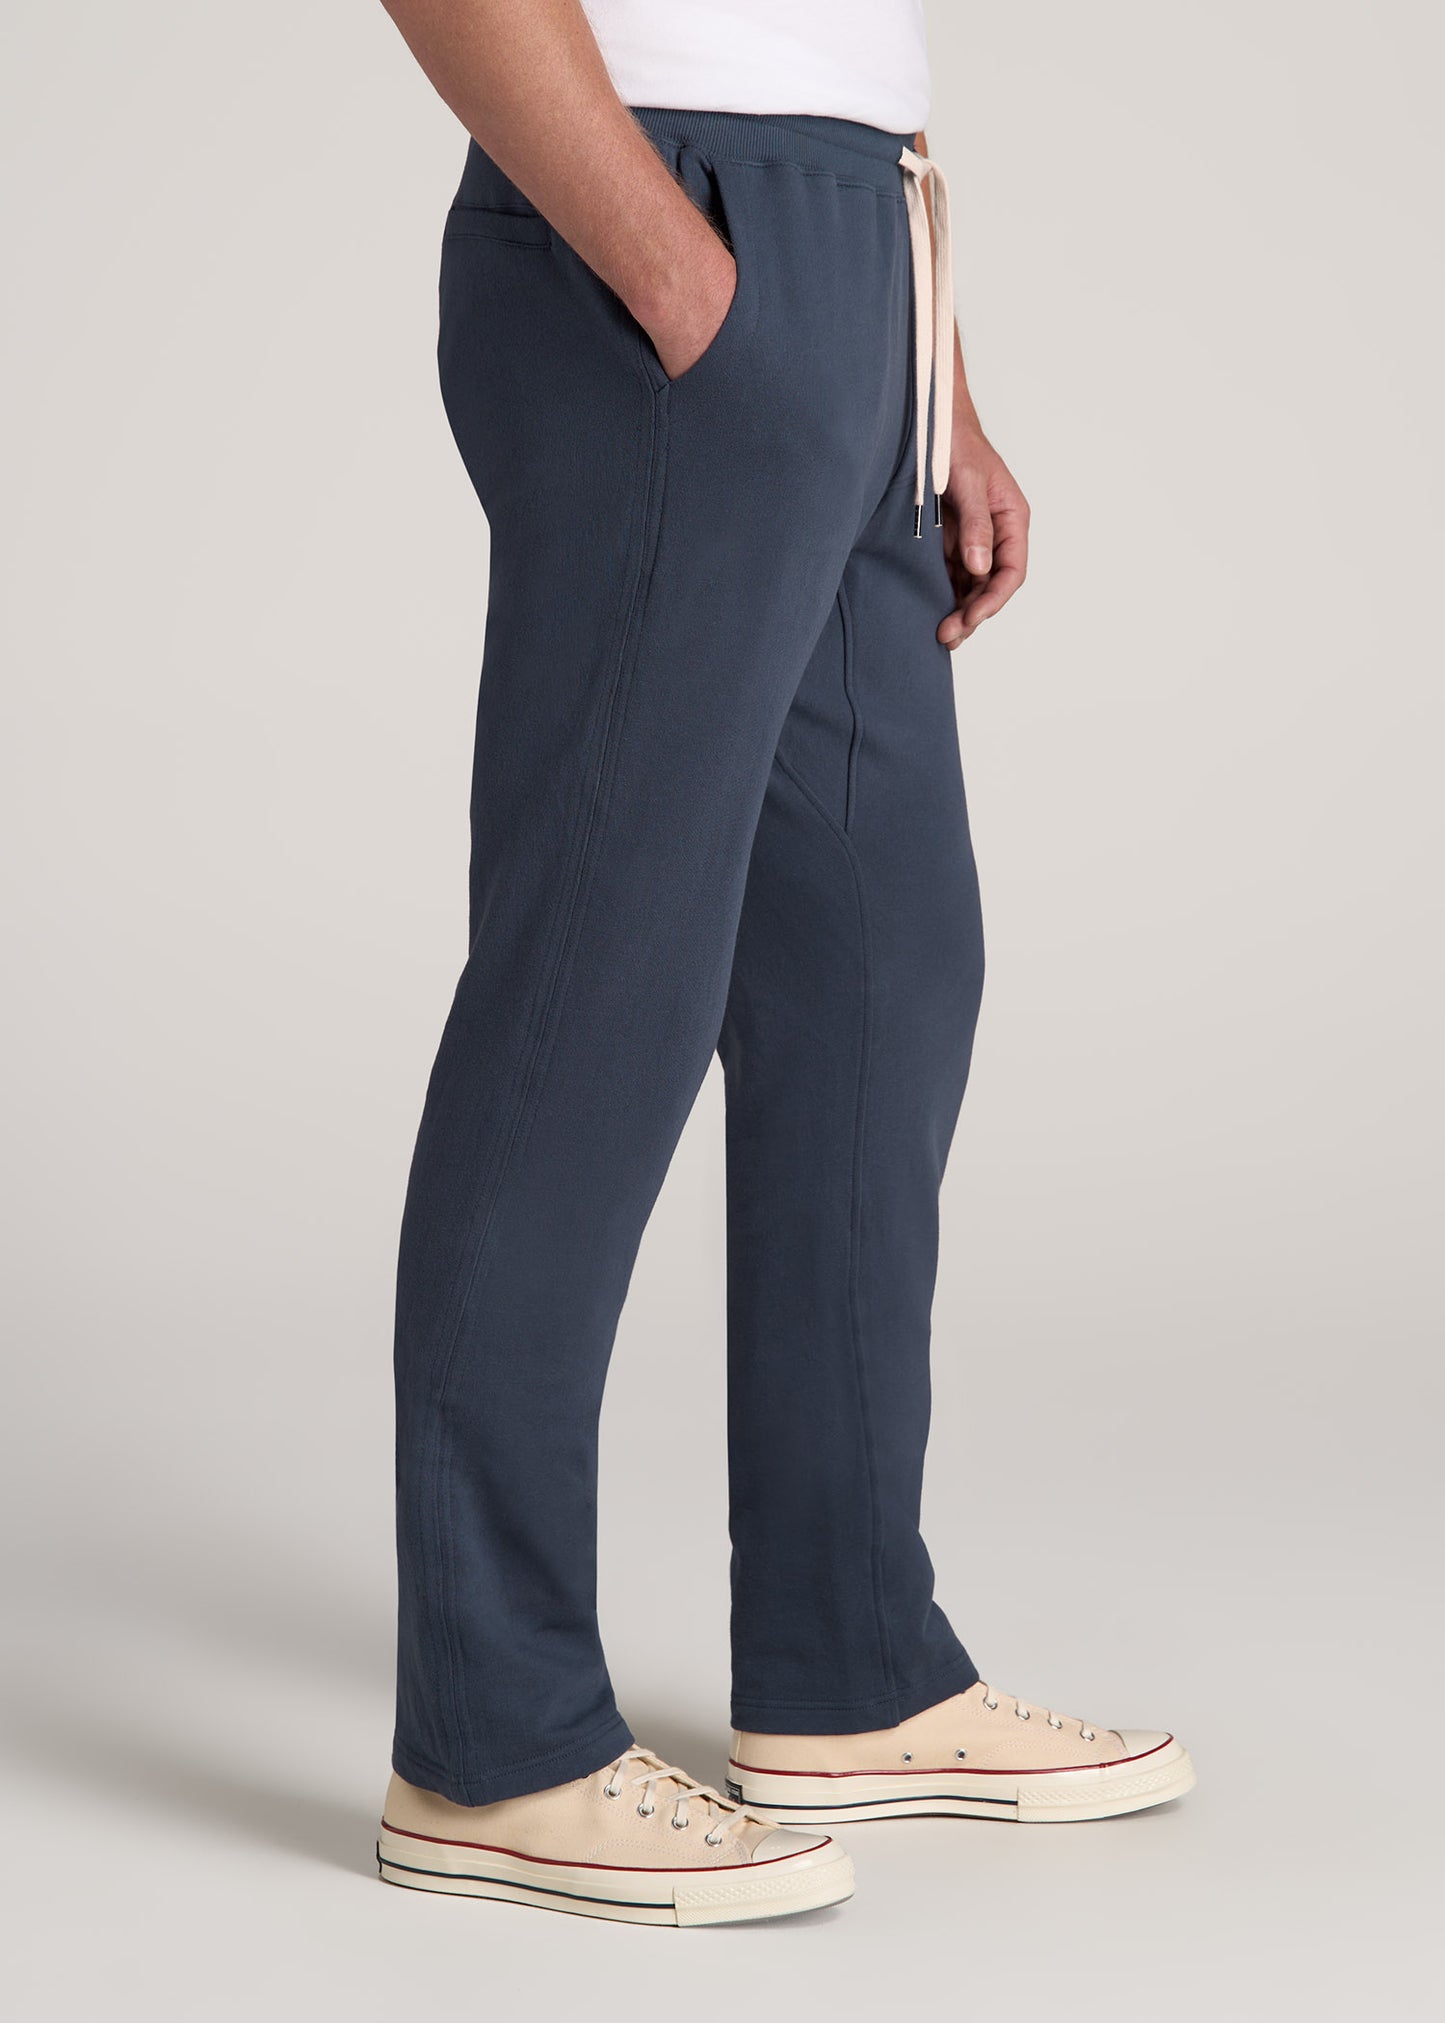 LJ&S Brushed Terrycloth Sweatpants for Tall Men in Vintage Midnight Navy